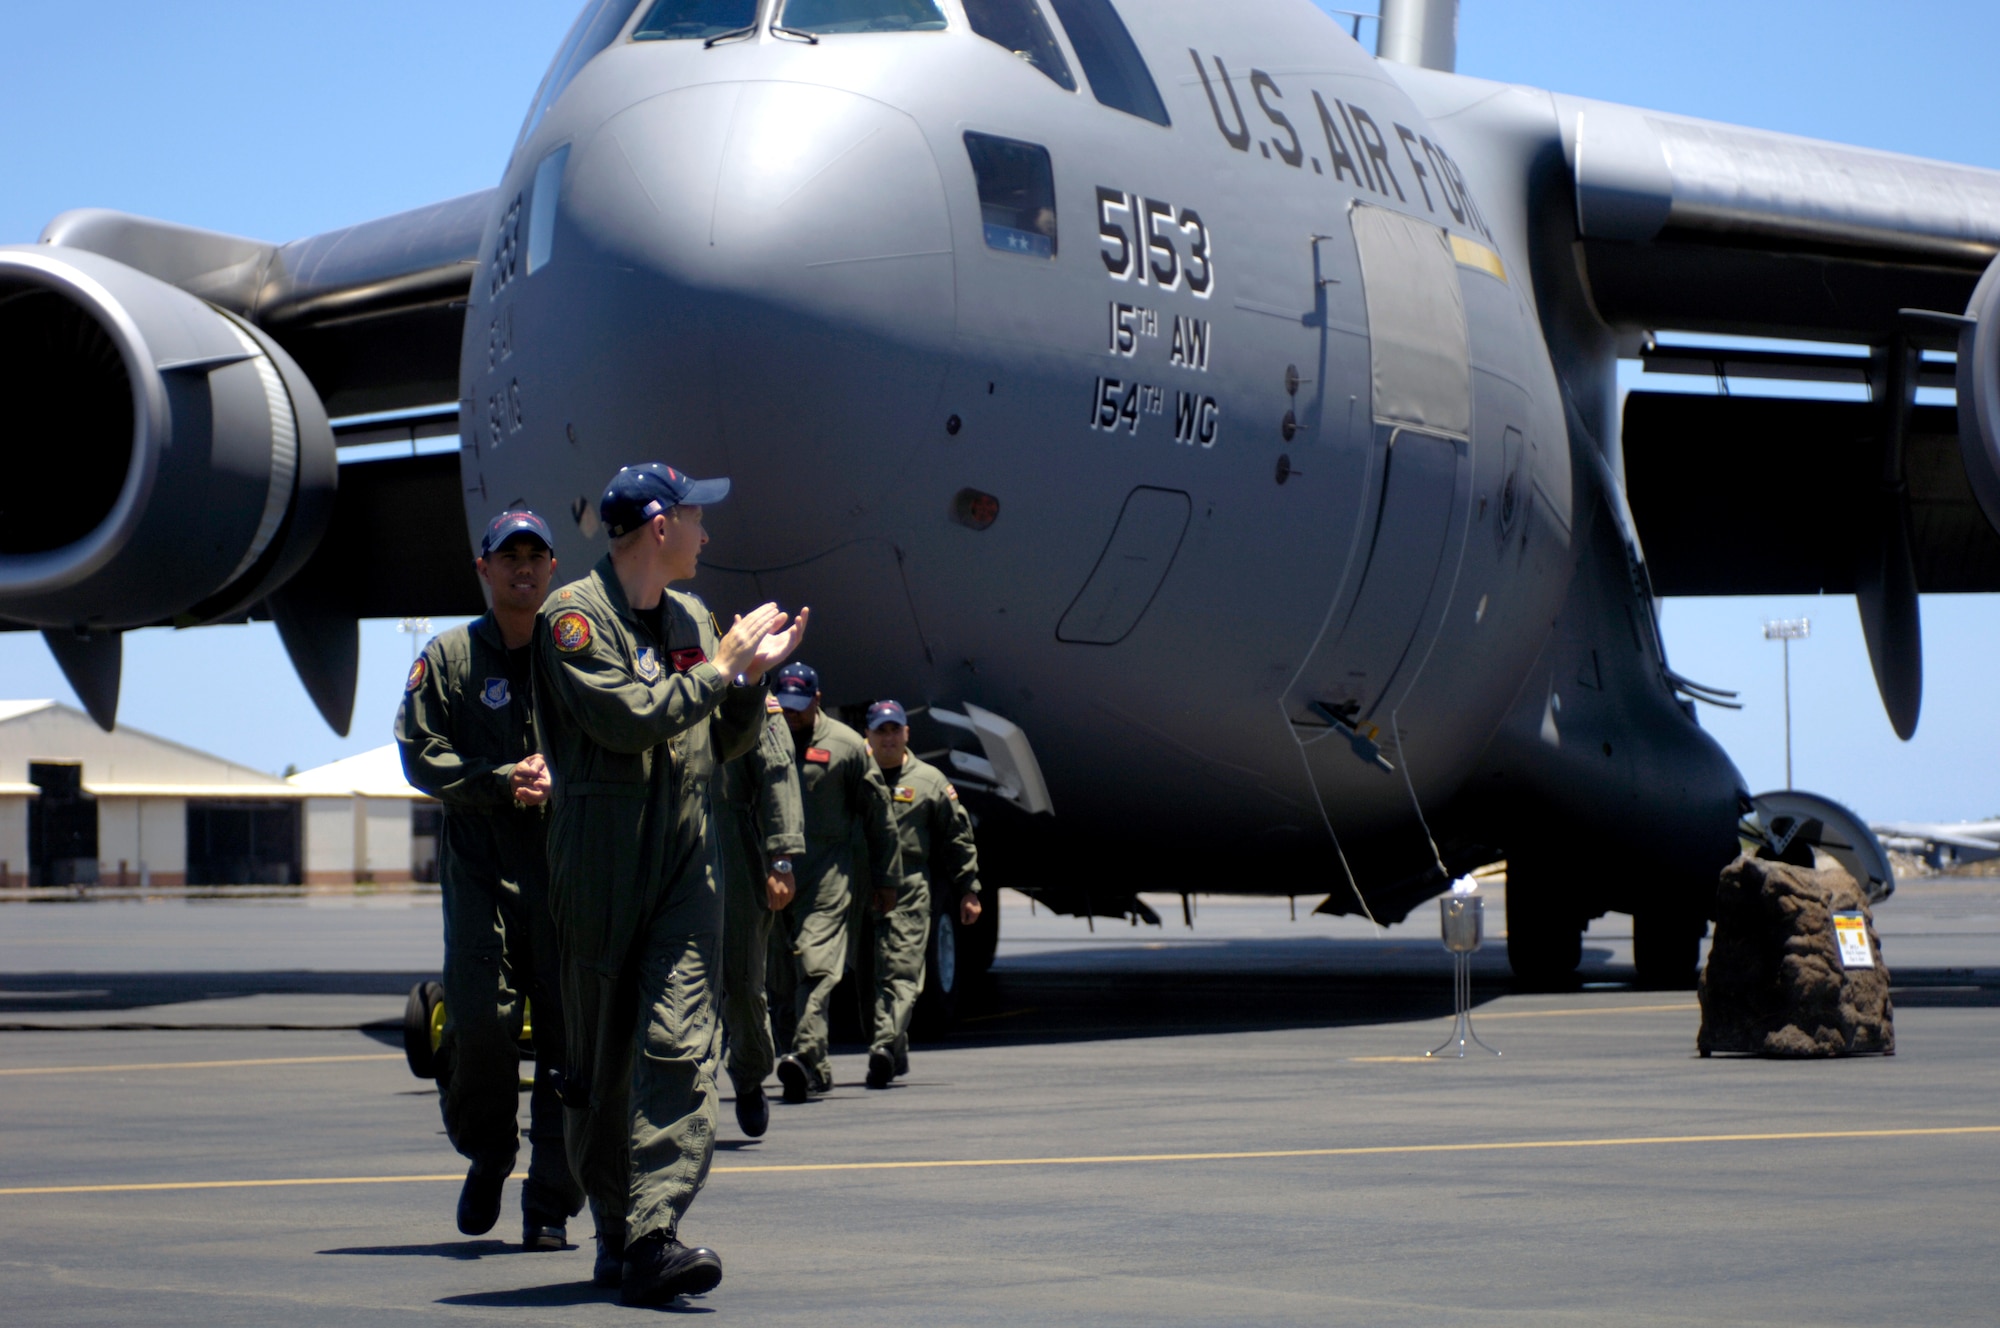 Aircrew members walk away from a C-17 Globemaster III at Hickam Air Force Base, Hawaii, on July 18. The "Spirit of Kamehameha-Imua" is the eighth and final C-17 for the 15th Airlift Wing at Hickam. It marks the successful transformation for the 15th AW from a support unit to an operational strategic airlift wing. The maintainers are active duty Airmen and Hawaii Air National Guardsmen. (U.S. Air Force photo/Tech. Sgt. Shane A. Cuomo)